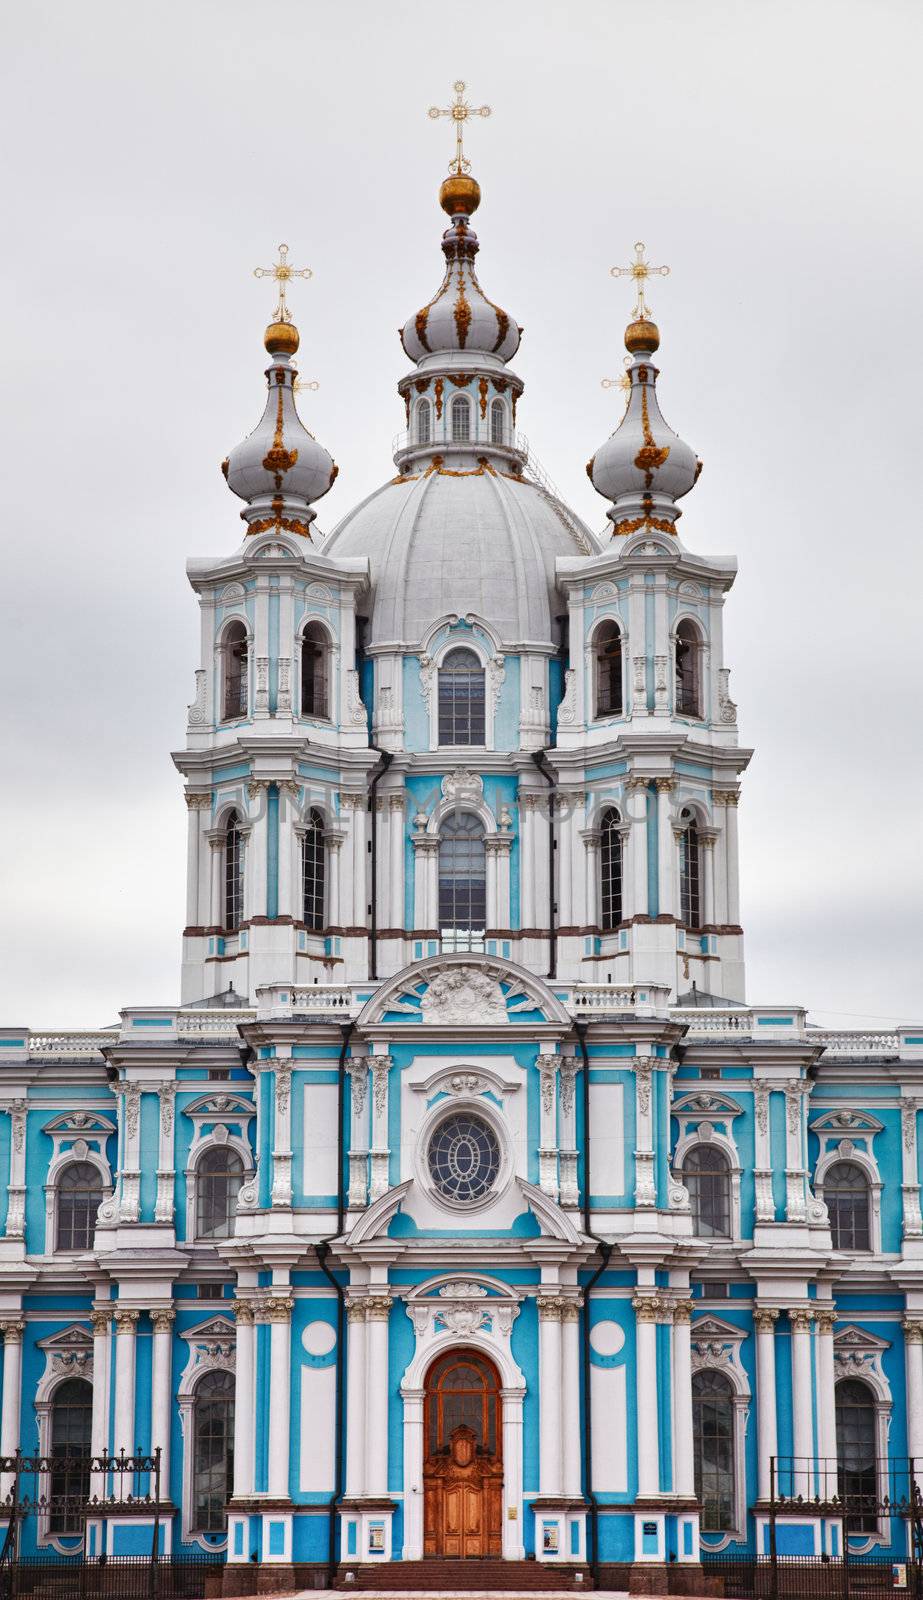 Ancient Russian Orthodox church in St. Petersburg by pzaxe